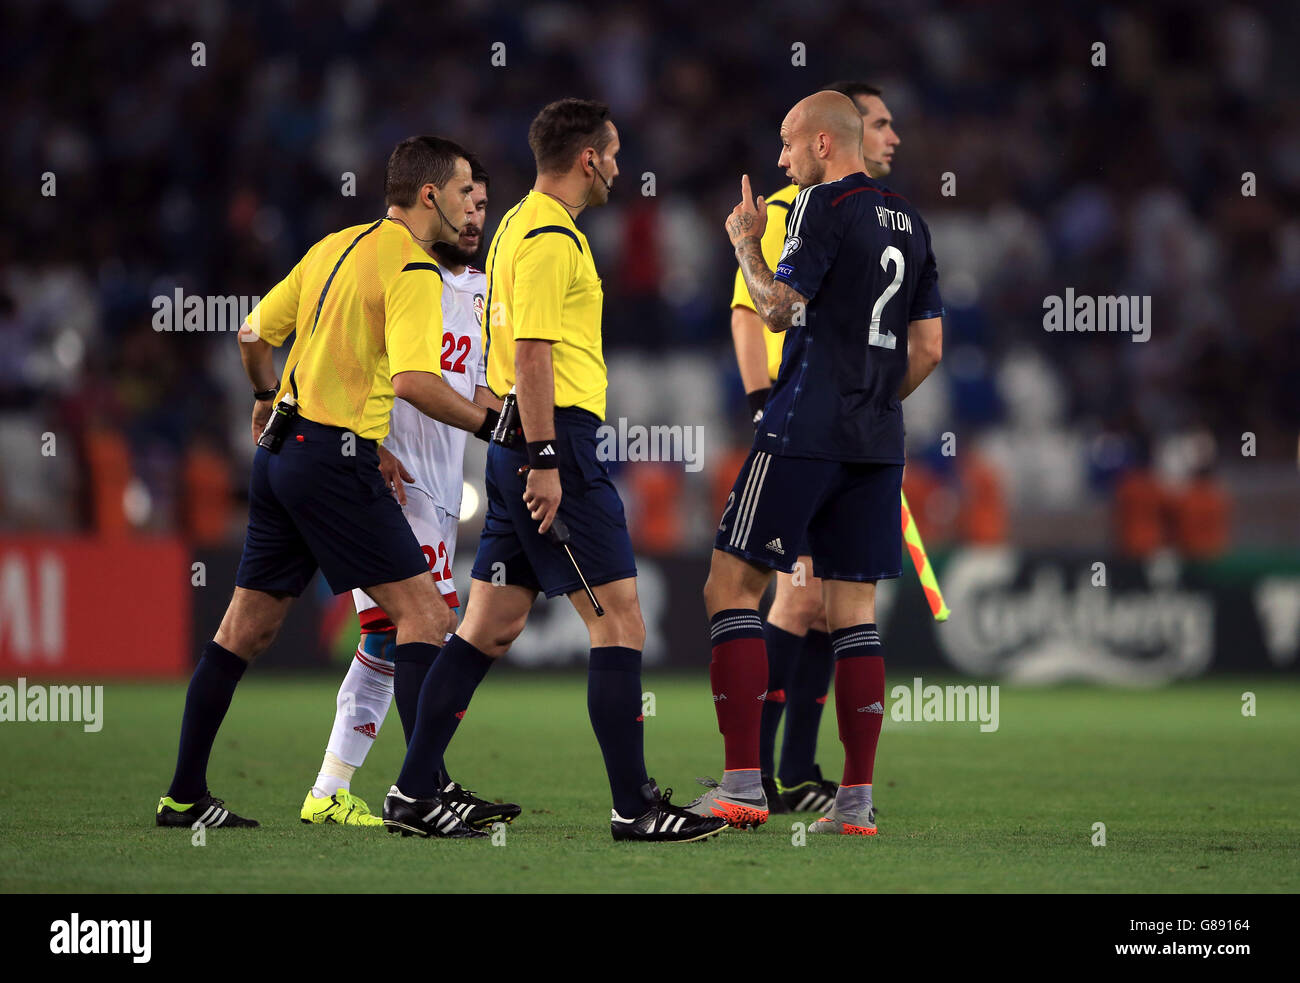 Scotland's Alan Hutton speaks to the officials during the UEFA European Championship Qualifying match at the Boris Paichadze Dinamo Arena, Tbilisi. Picture date: Friday September 4, 2015. See PA story SOCCER Georgia. Photo credit should read: Nick Potts/PA Wire. RESTRICTIONS: Use subject to restrictions. . Commercial use only with prior written consent of the Scottish FA. Call +44 (0)1158 447447 for further information. Stock Photo